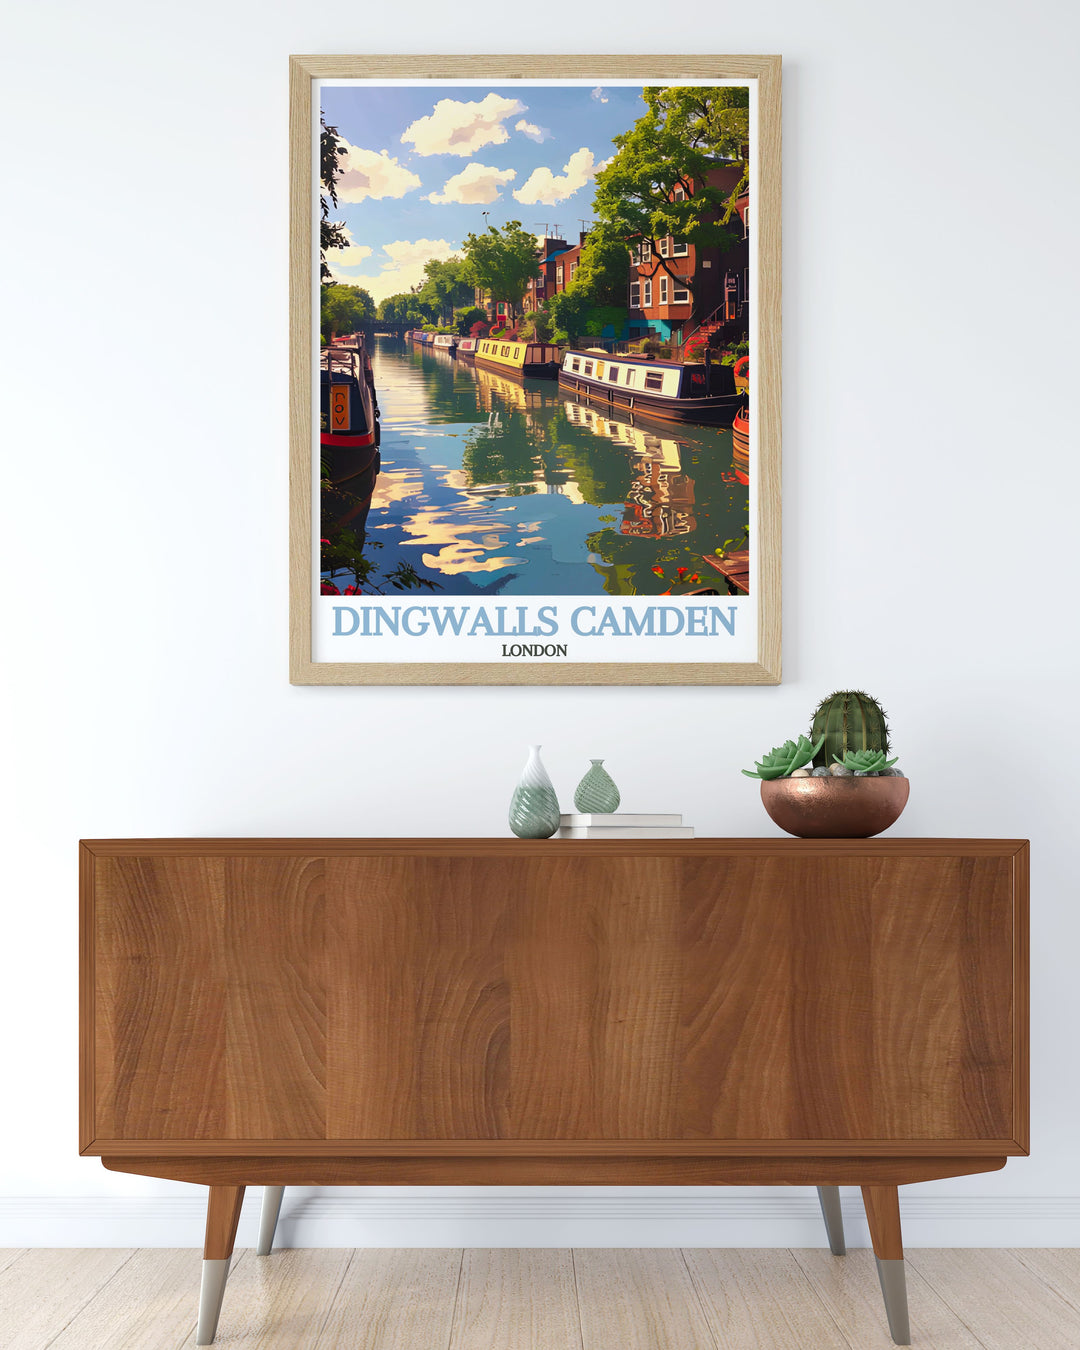 Regents Canal is beautifully illustrated in this travel poster, capturing its picturesque walkways and charming houseboats, perfect for enhancing your home decor.